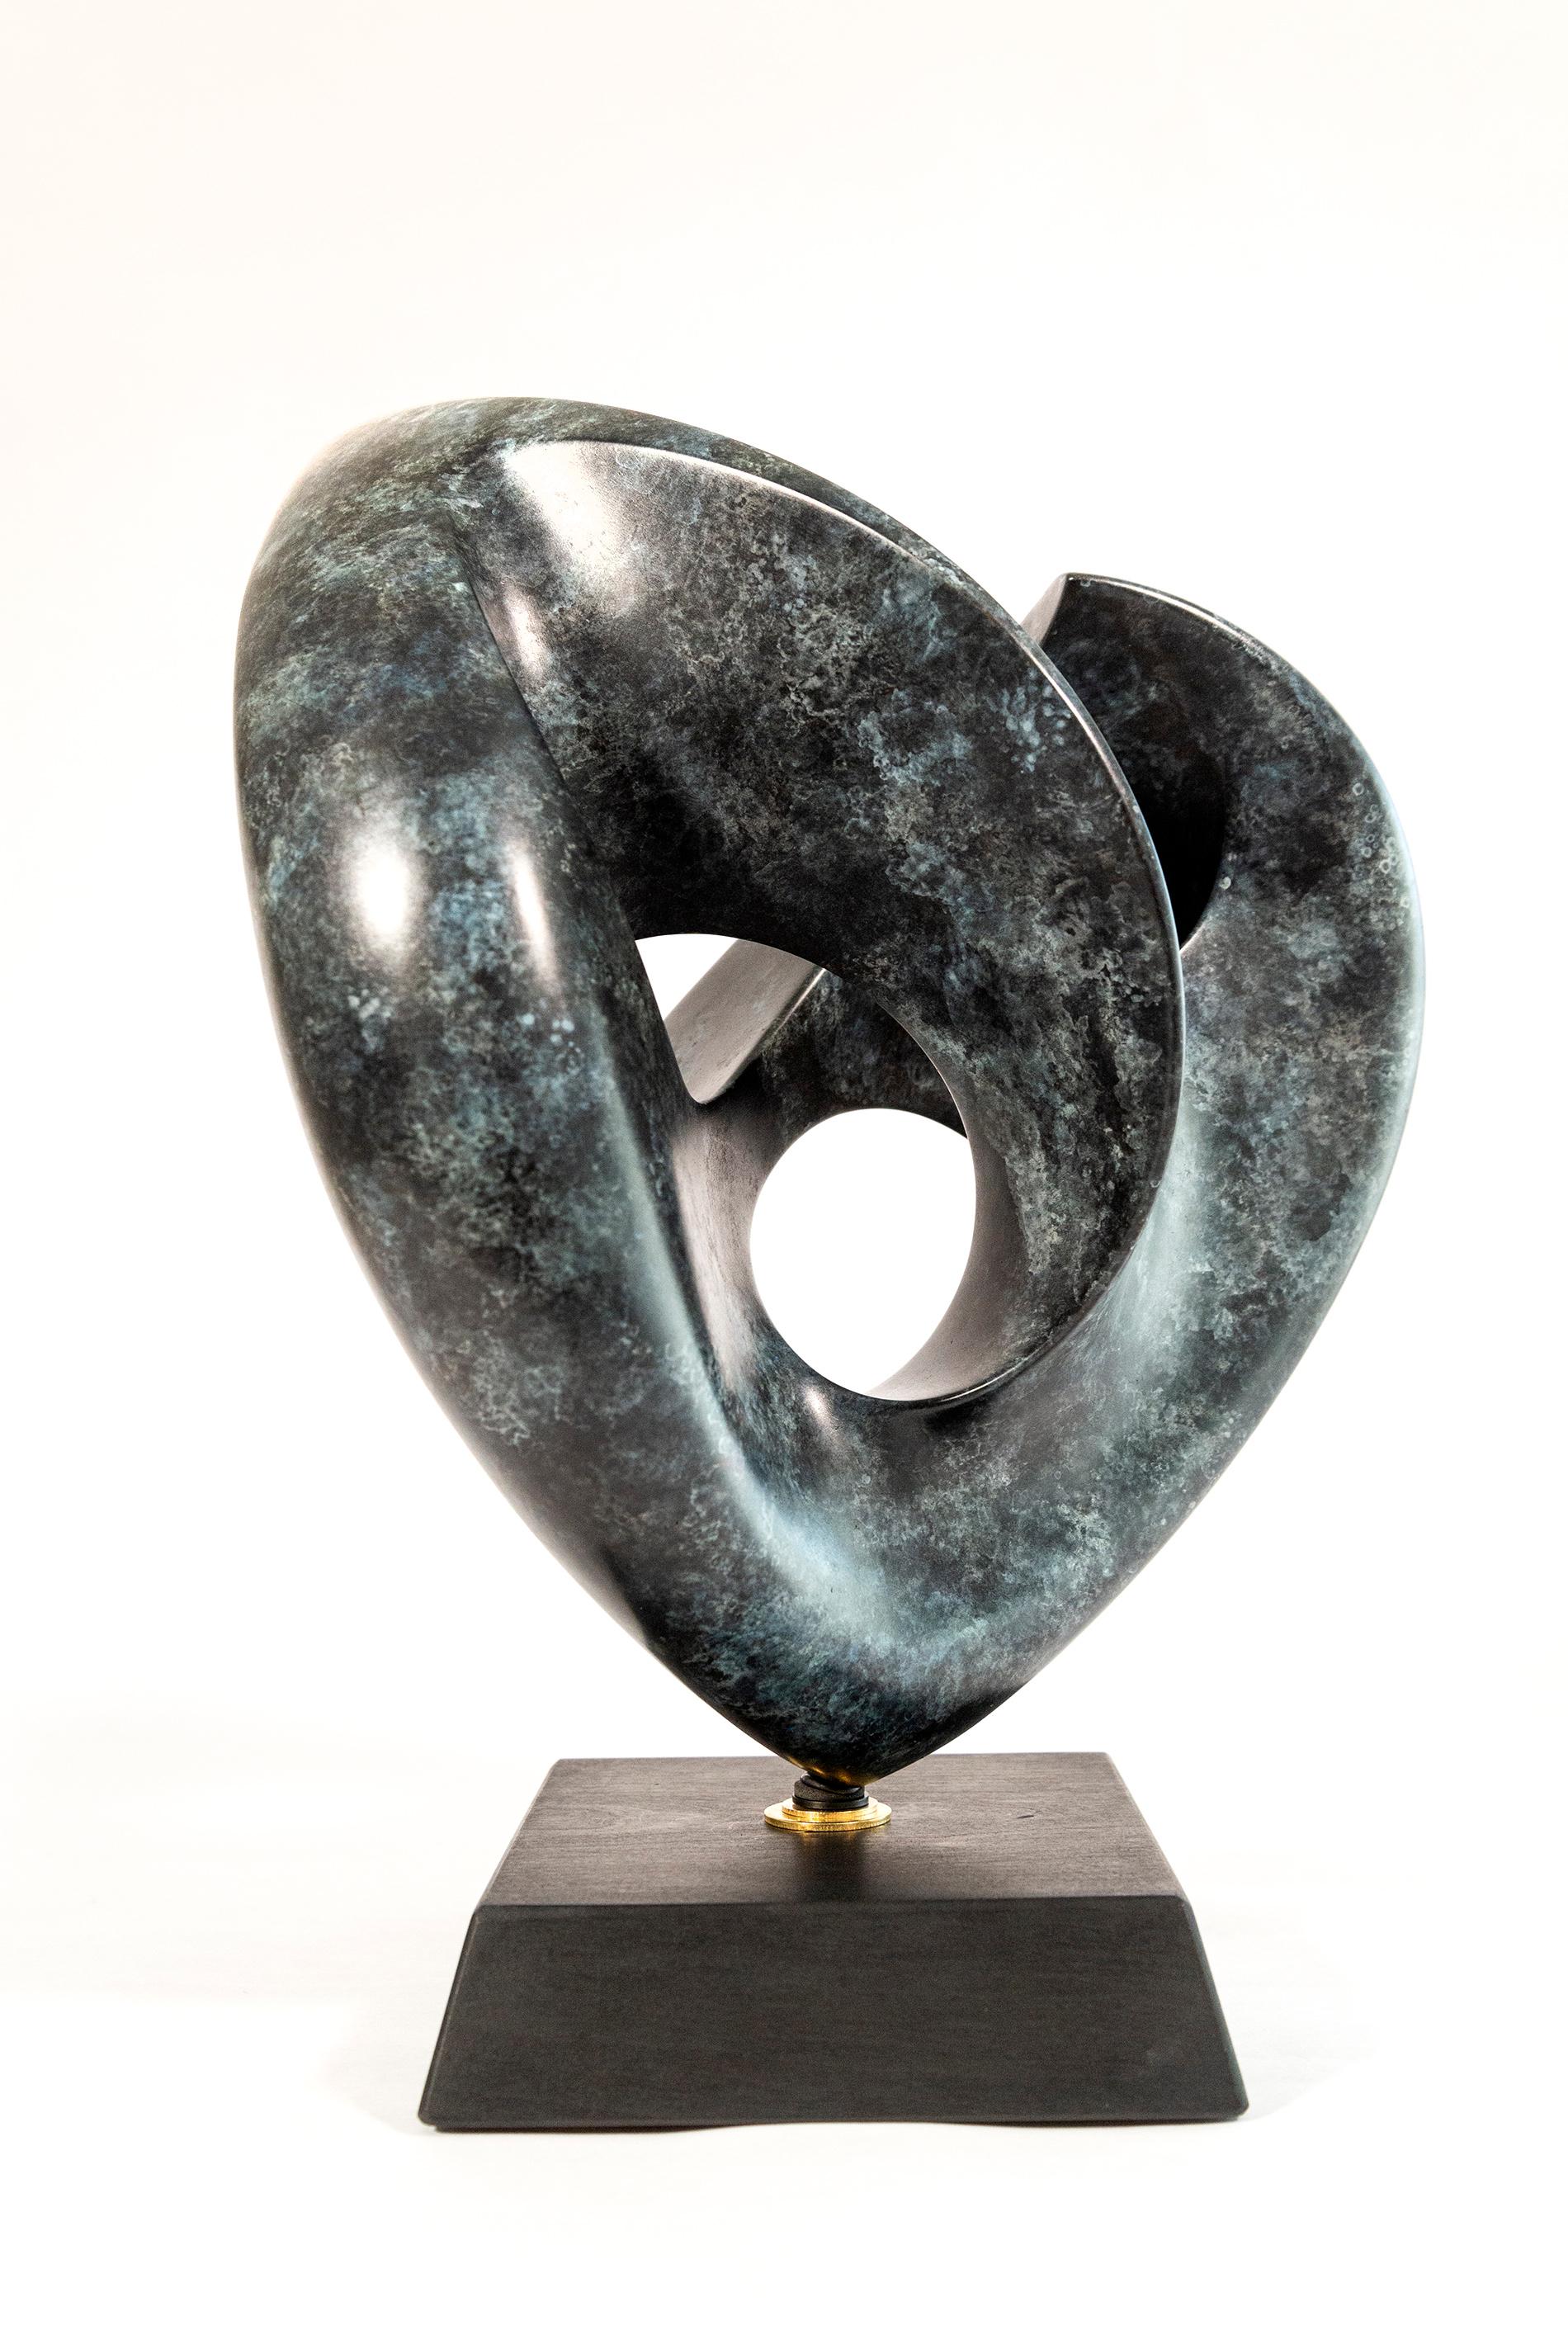 The lyrical lush lines of this heart-shaped bronze sculpture were created by the American artist David Chamberlain. Sculpted from one continuous piece, the highly patinated finish features flecks of turquoise in a dark bronze. Mounted on a wooden